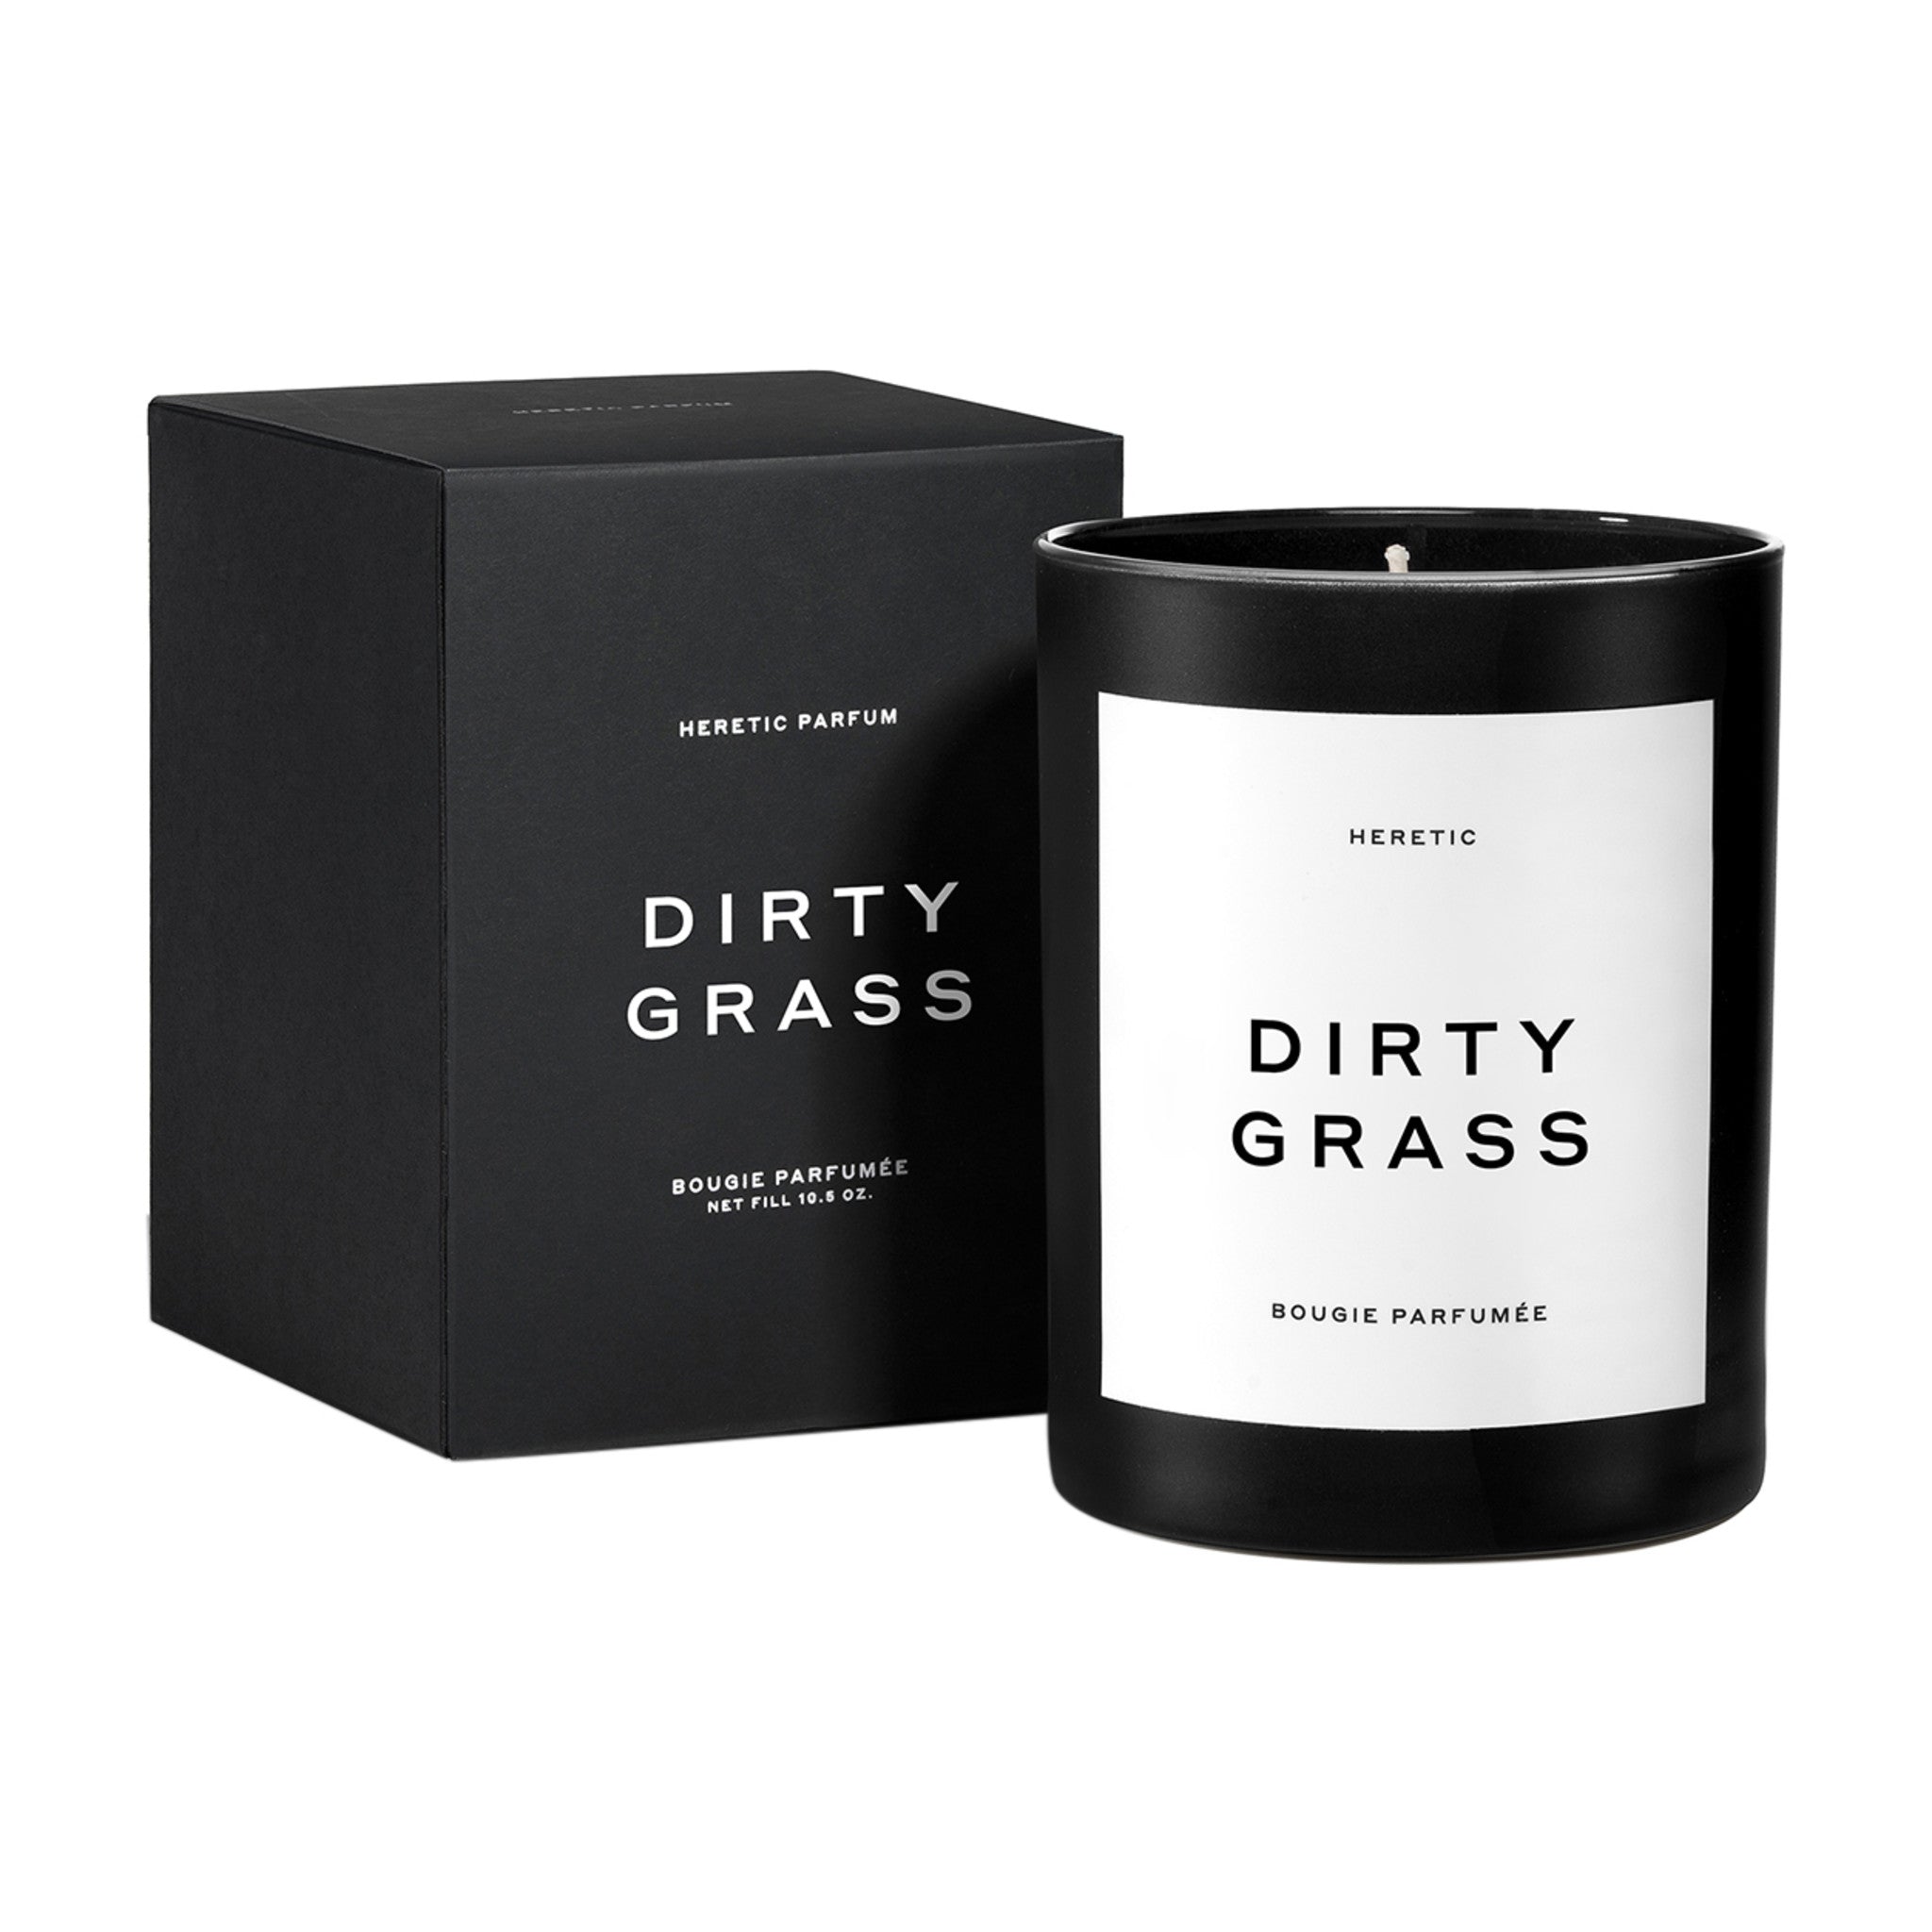 Heretic Dirty Grass Candle main image.